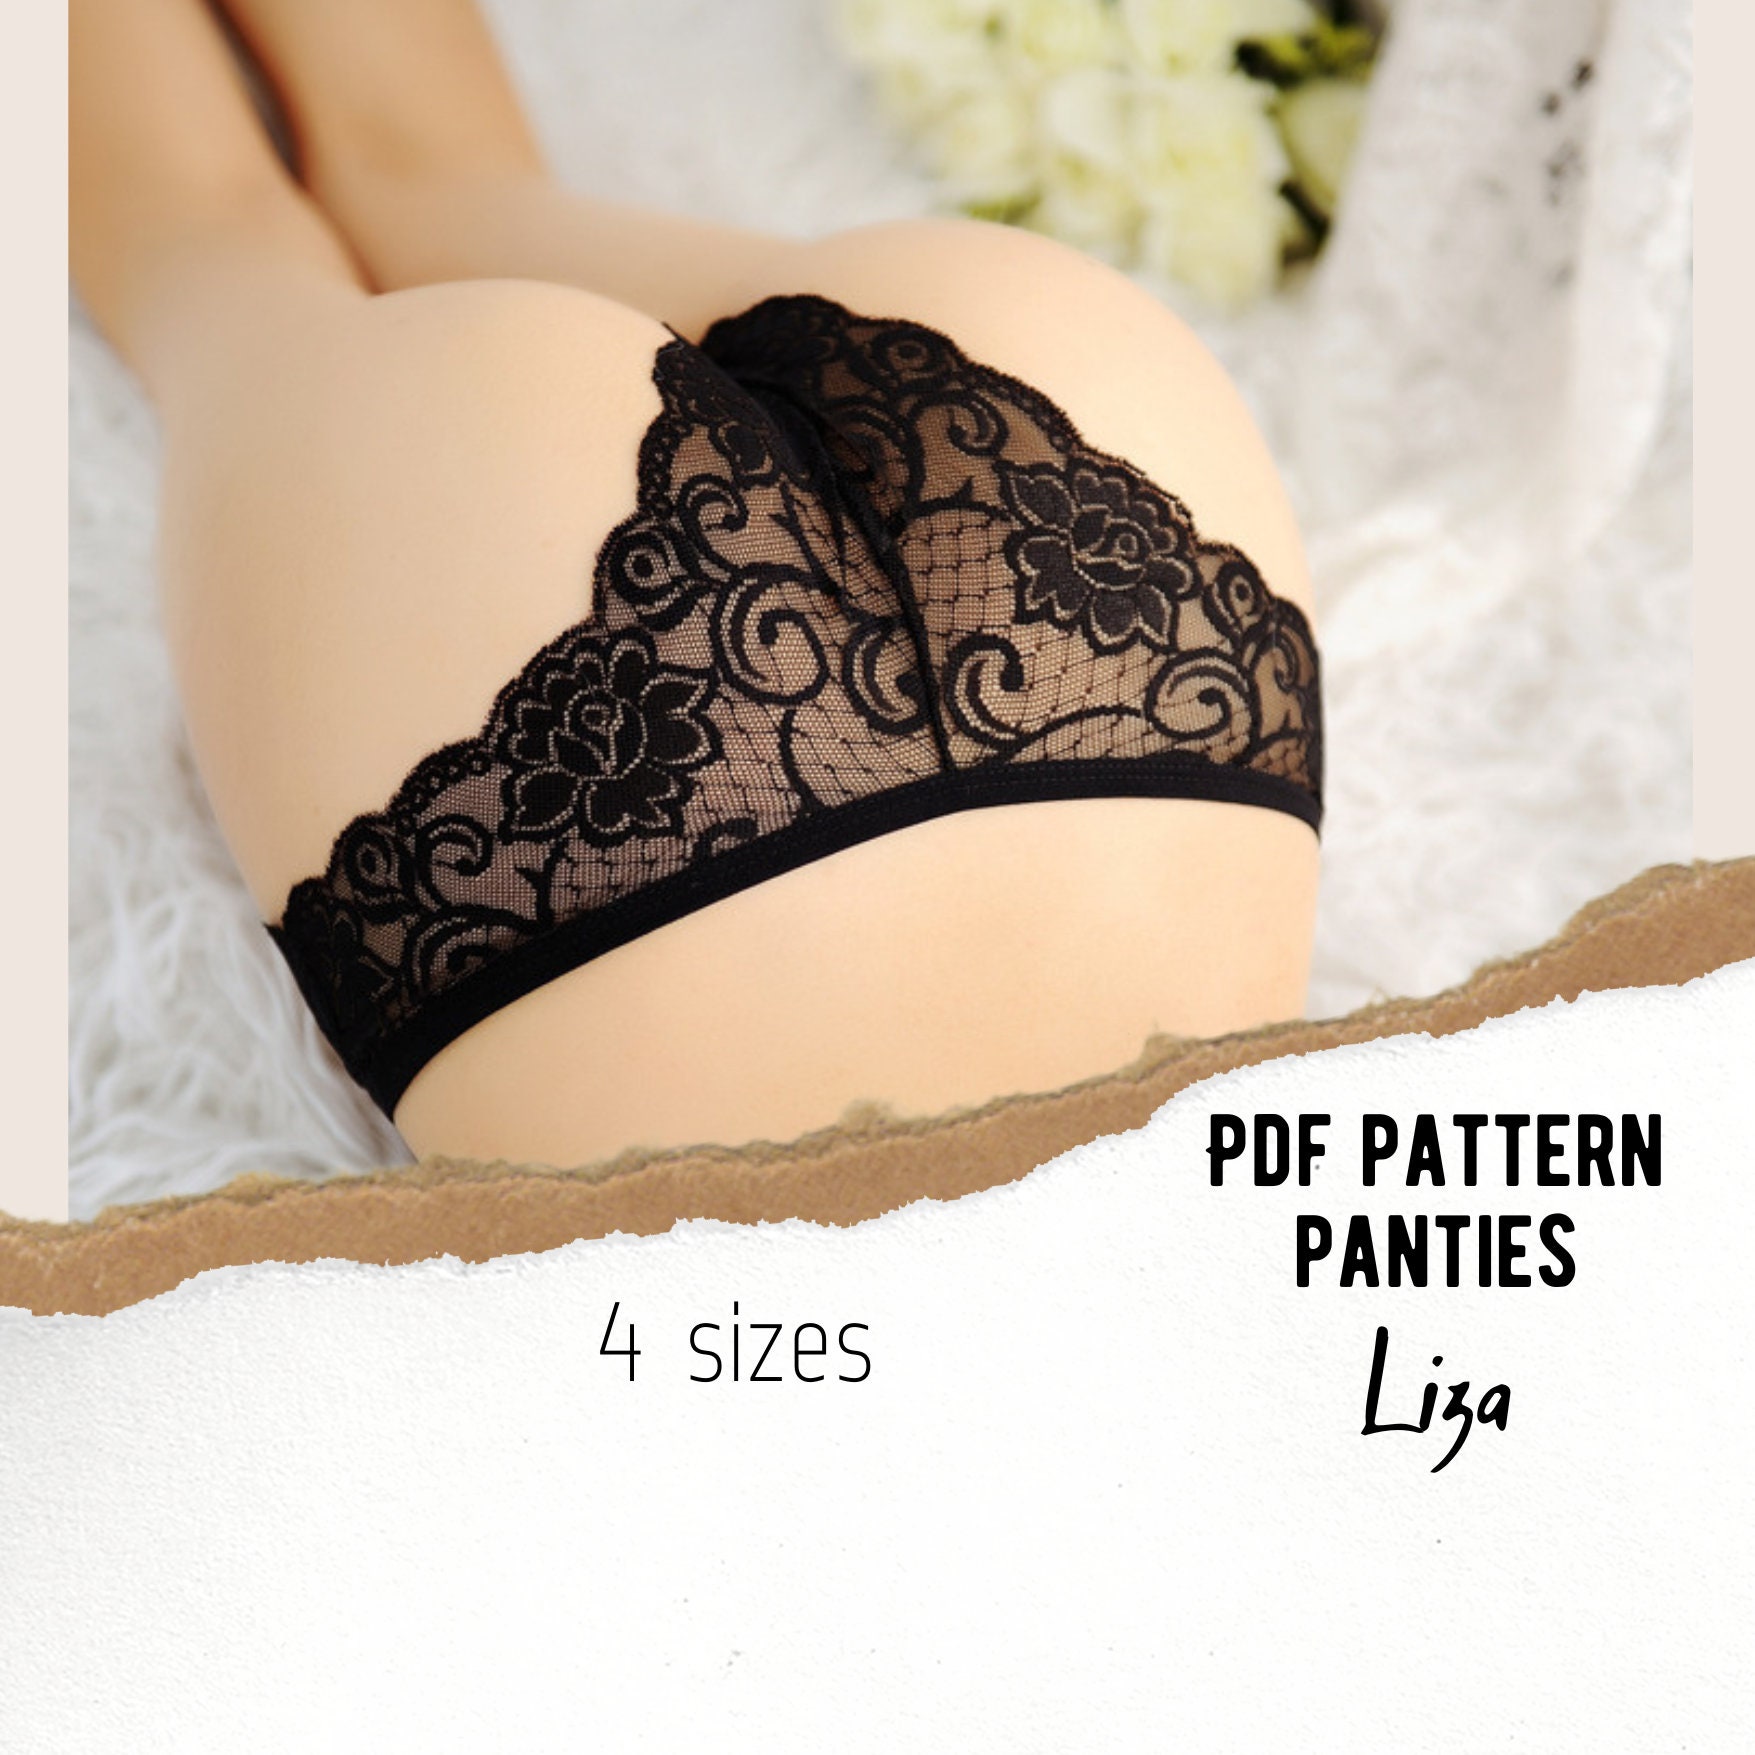 Sexy Lace Cheeky Panties, Strappy Low Cut Cheekies With Bow Tie Thong,  Women's Lingerie & Underwear